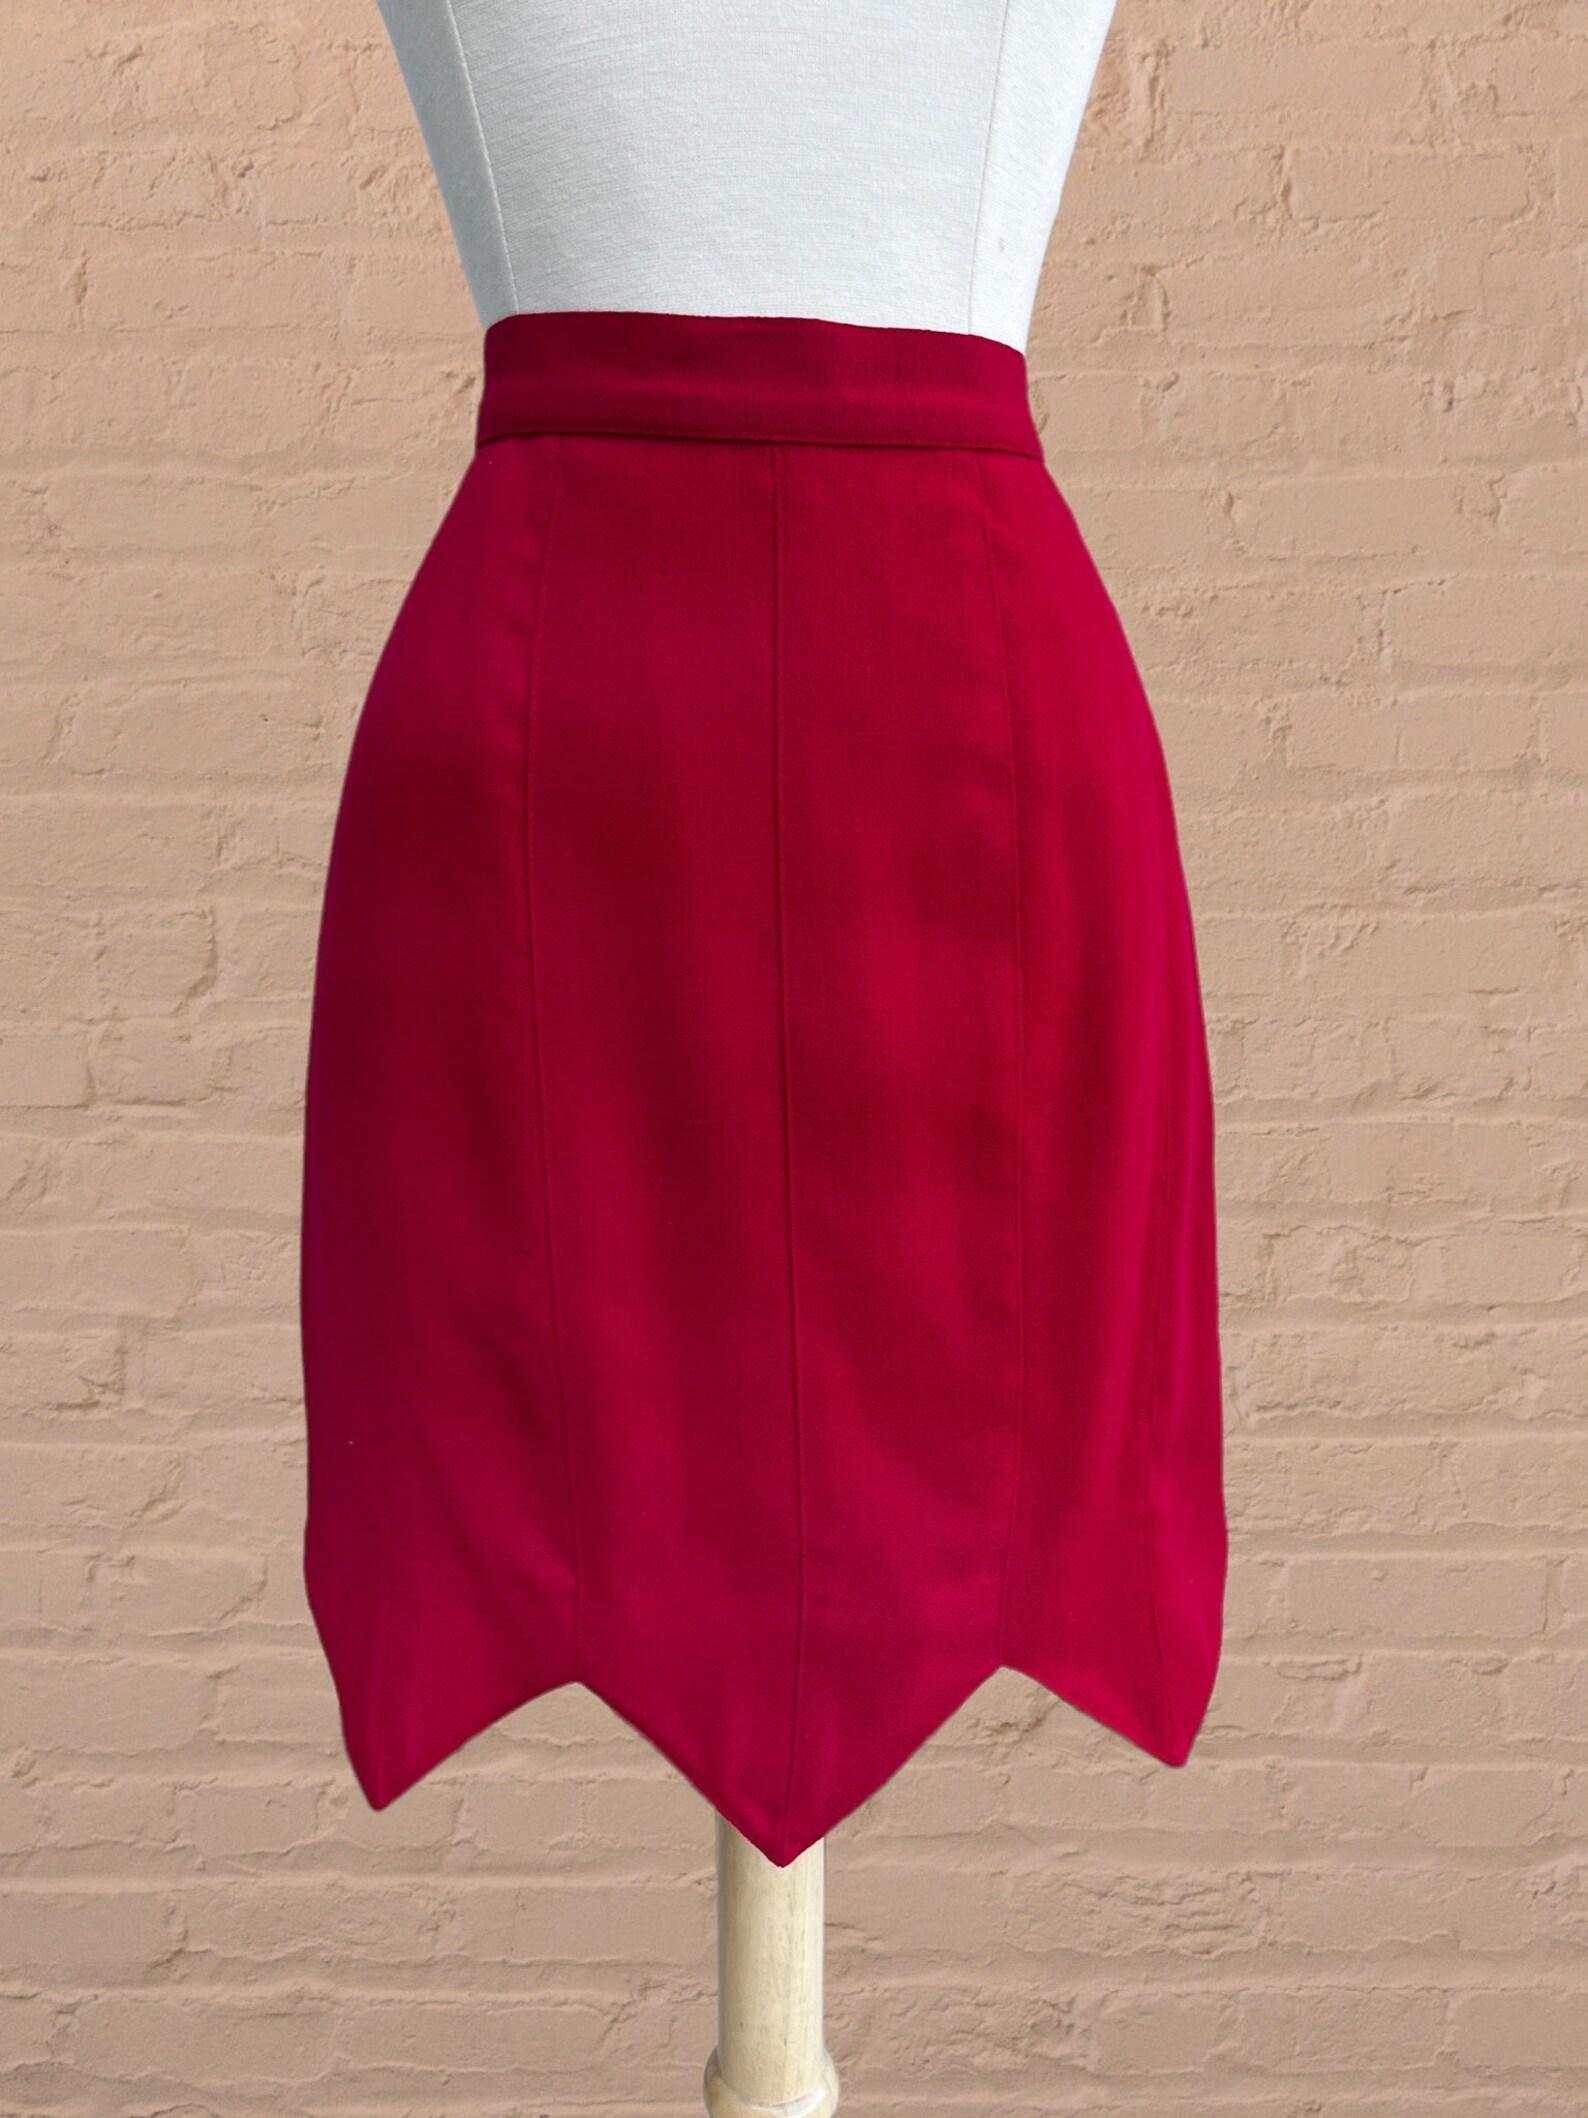 Gemma Kahng Berry Pink Wool Mini Skirt, Circa 1990s For Sale 1